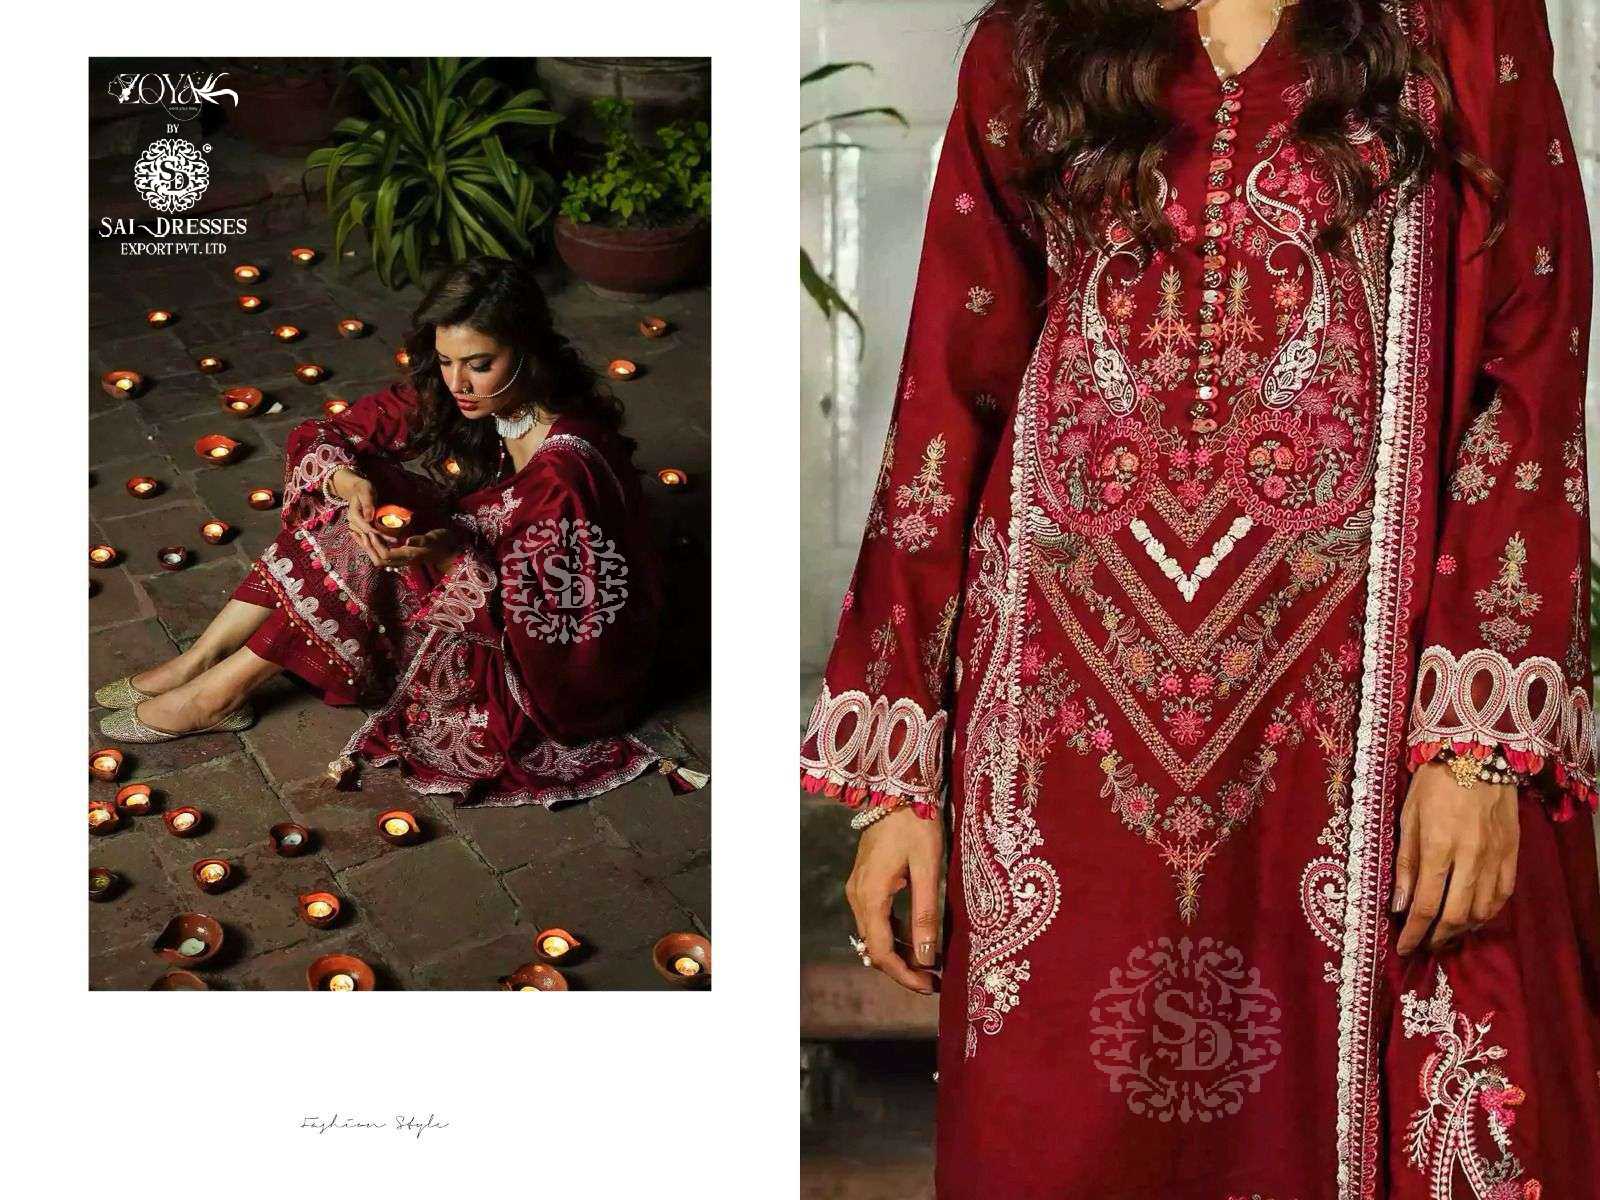 ELAF LUXURY 24 FESTIVE WEAR REYON COTTON WITH HEAVY SELF EMBROIDERED DESIGNER PAKISTANI DRESS MATERIAL IN WHOLESALE RATE IN SURAT 